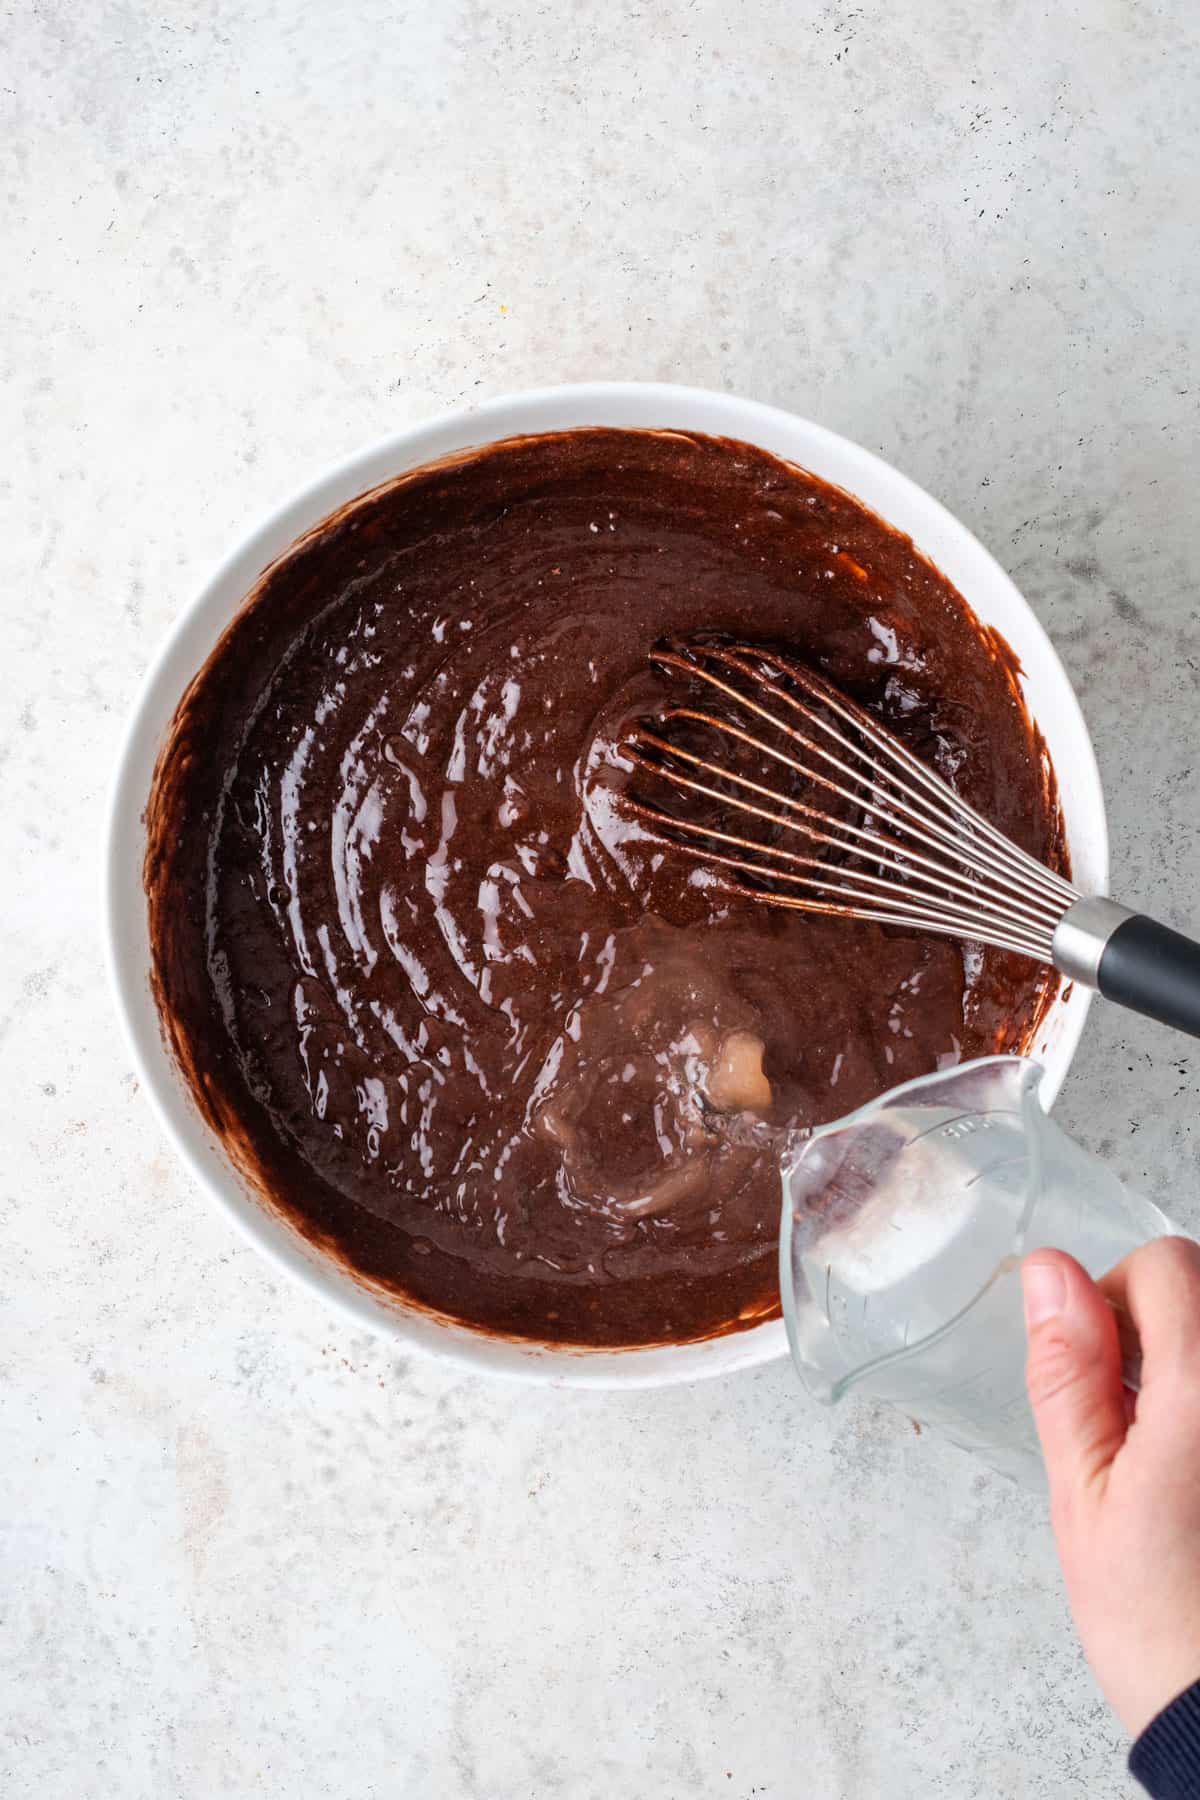 Hot water being poured into the mixed chocolate cake batter.